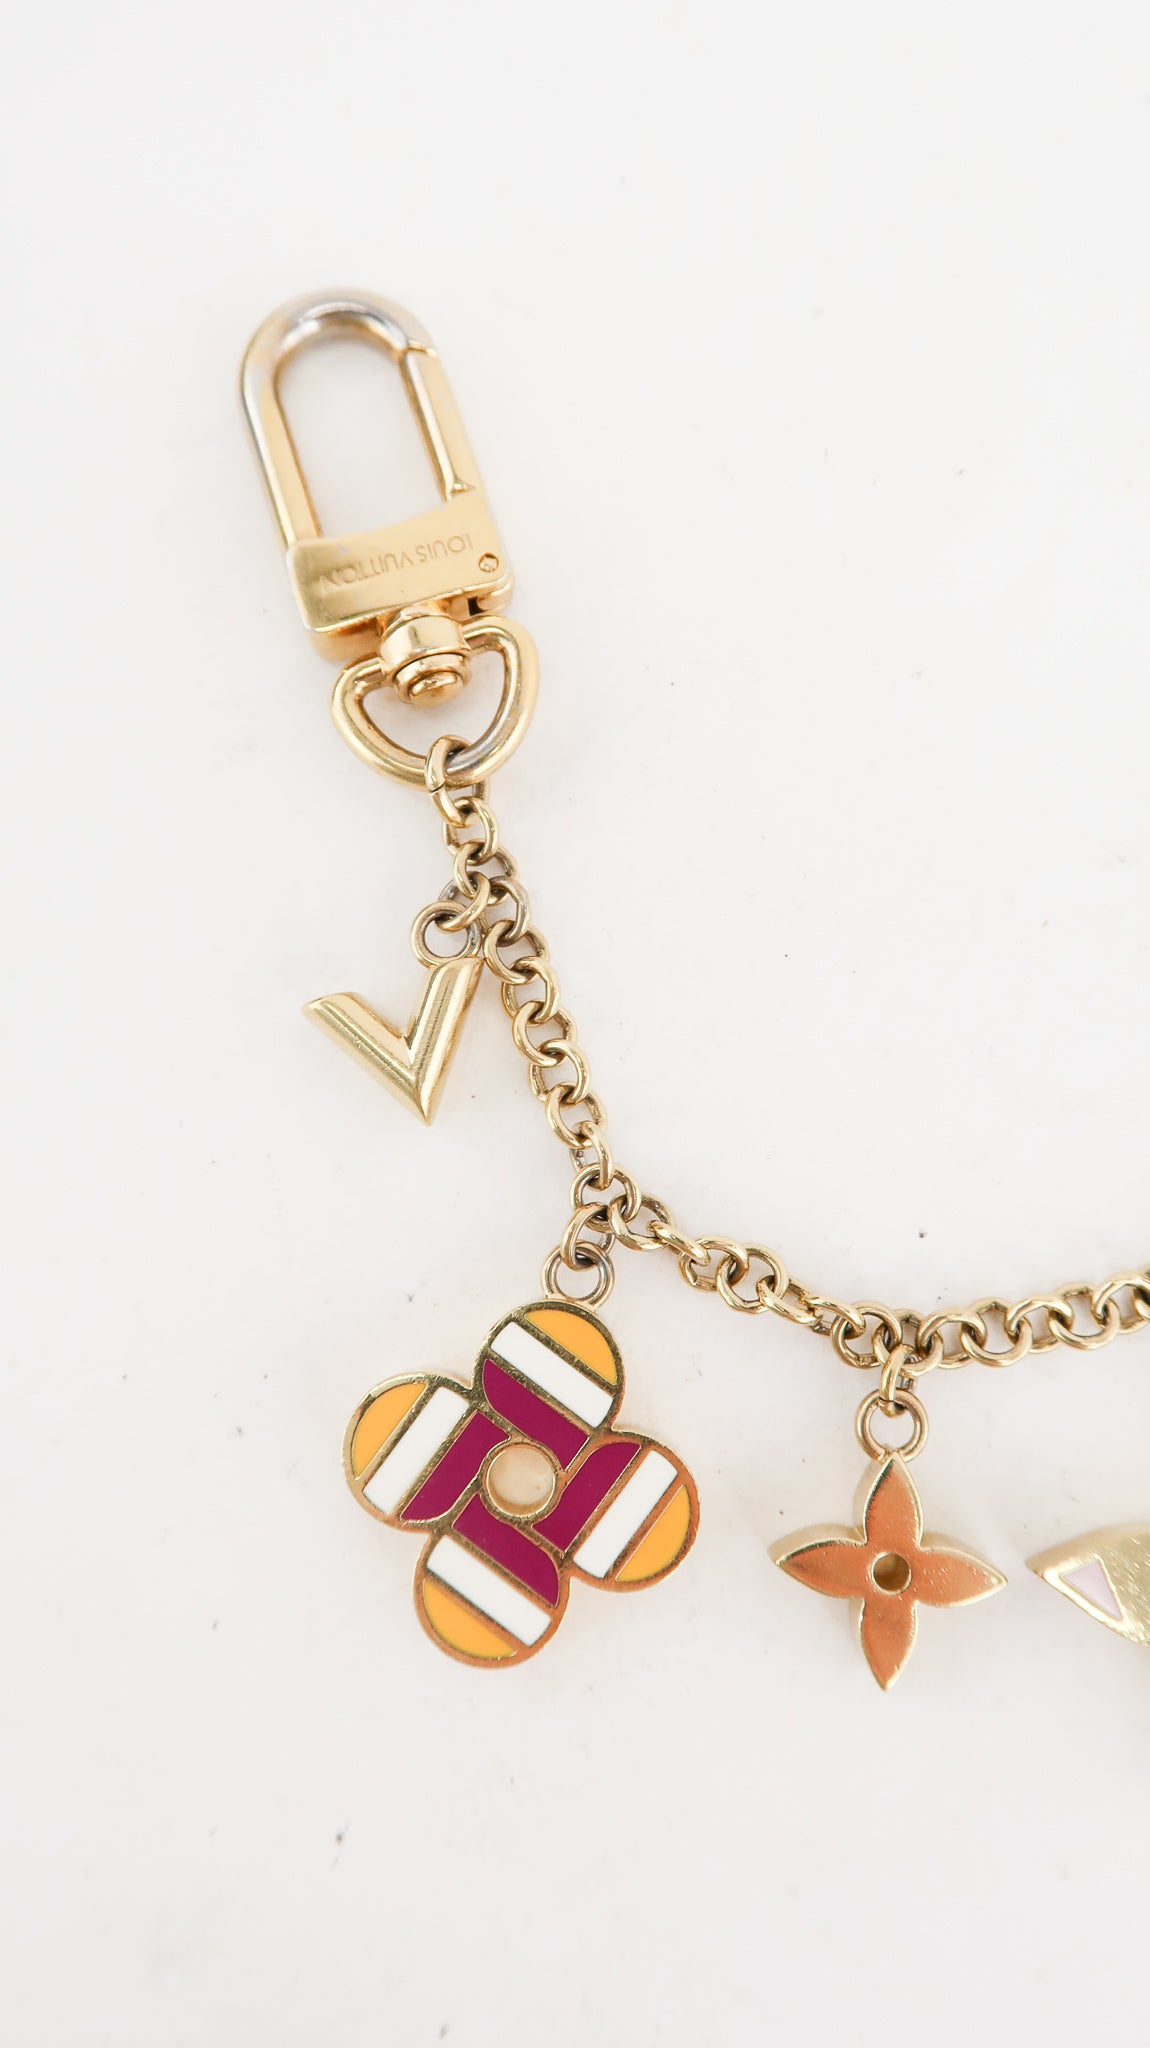 Louis Vuitton Gold Finished Metal Spring Street Chain Bag Charm